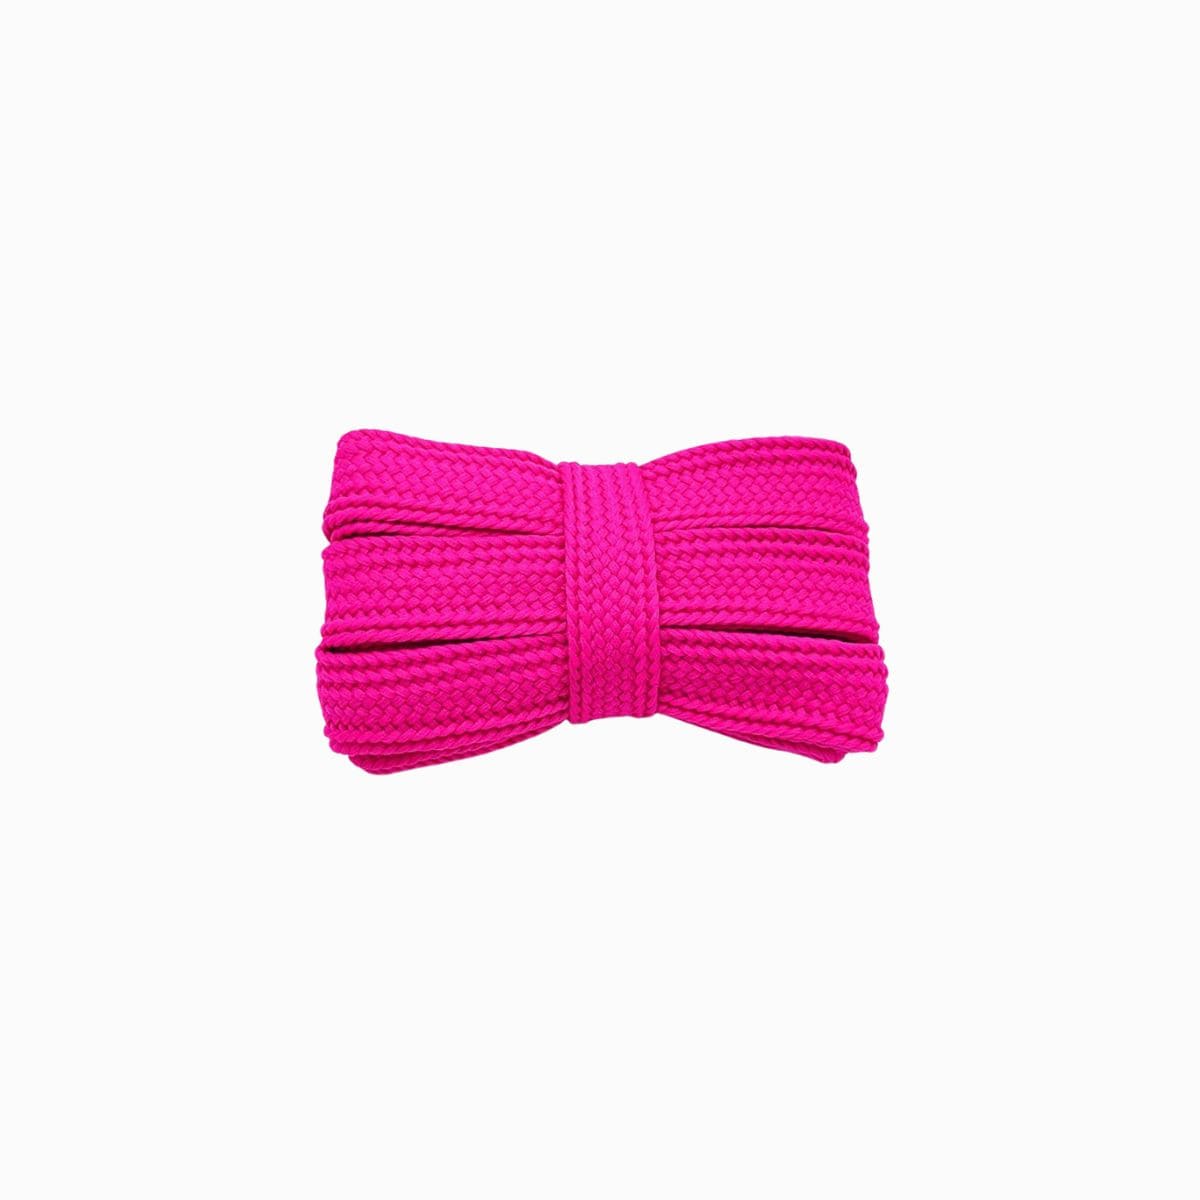 Hot Pink Adidas Fat Laces Replacement shoelaces for Adidas Sneakers by Kicks Shoelaces